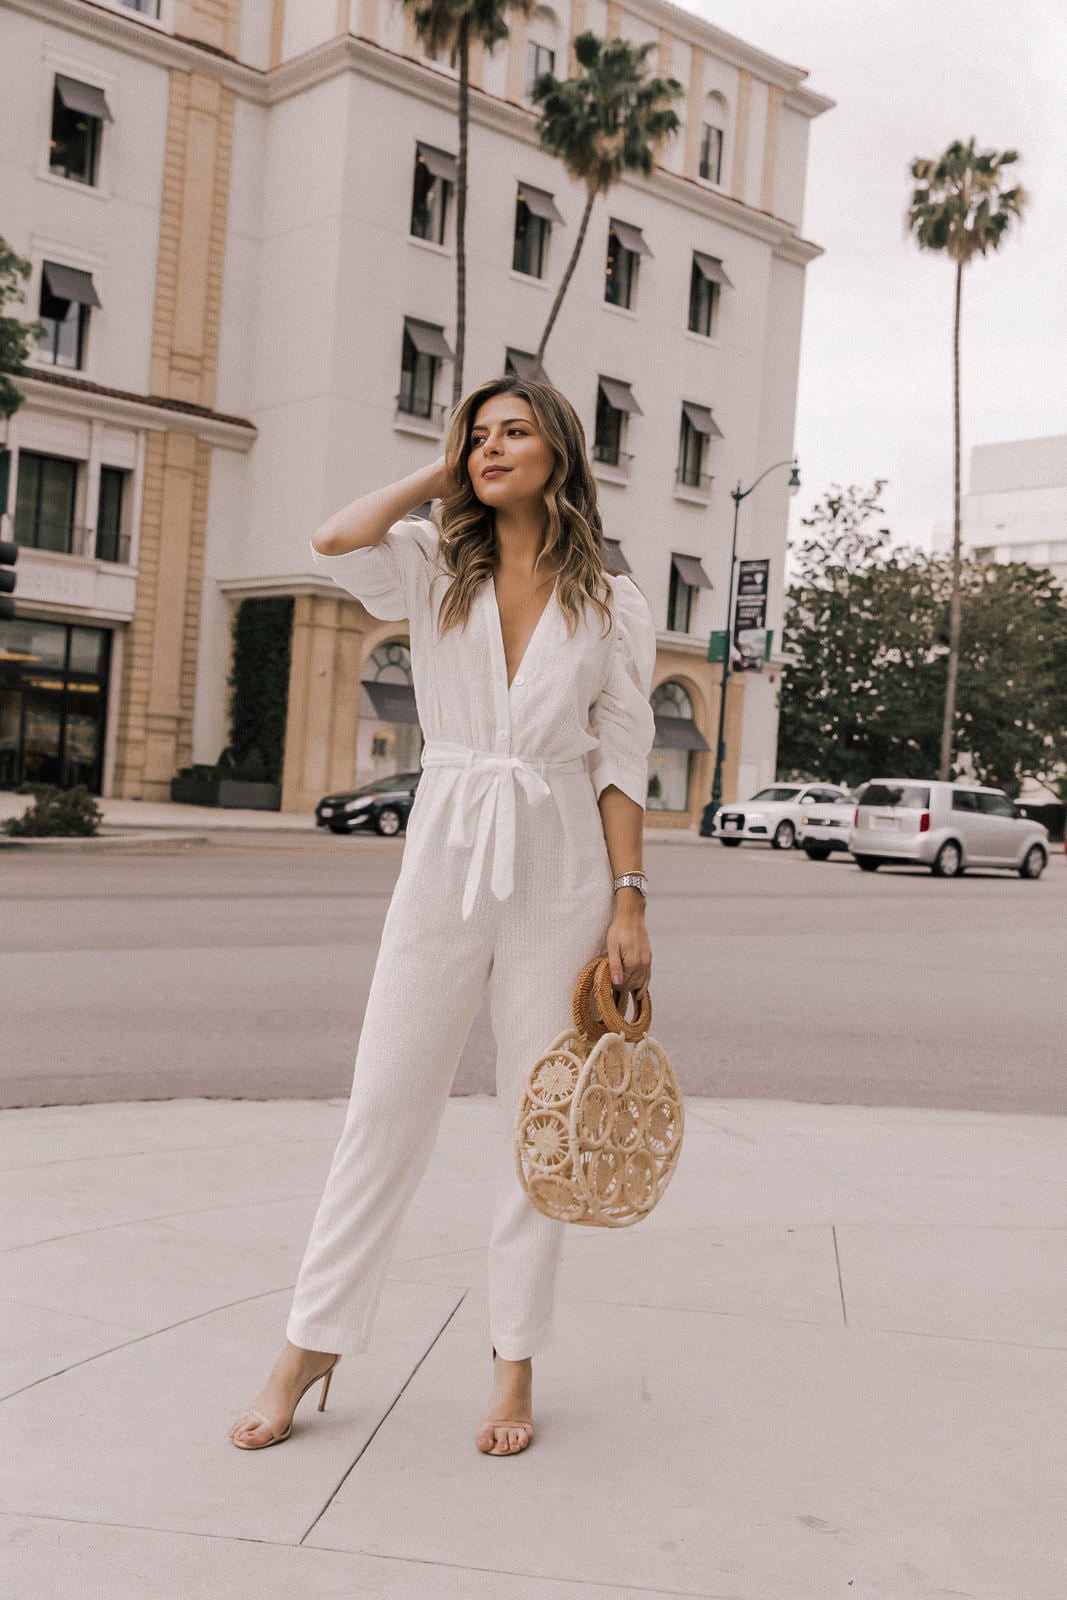 How to Wear a Jumpsuit - 5 Must Follow Style Tips